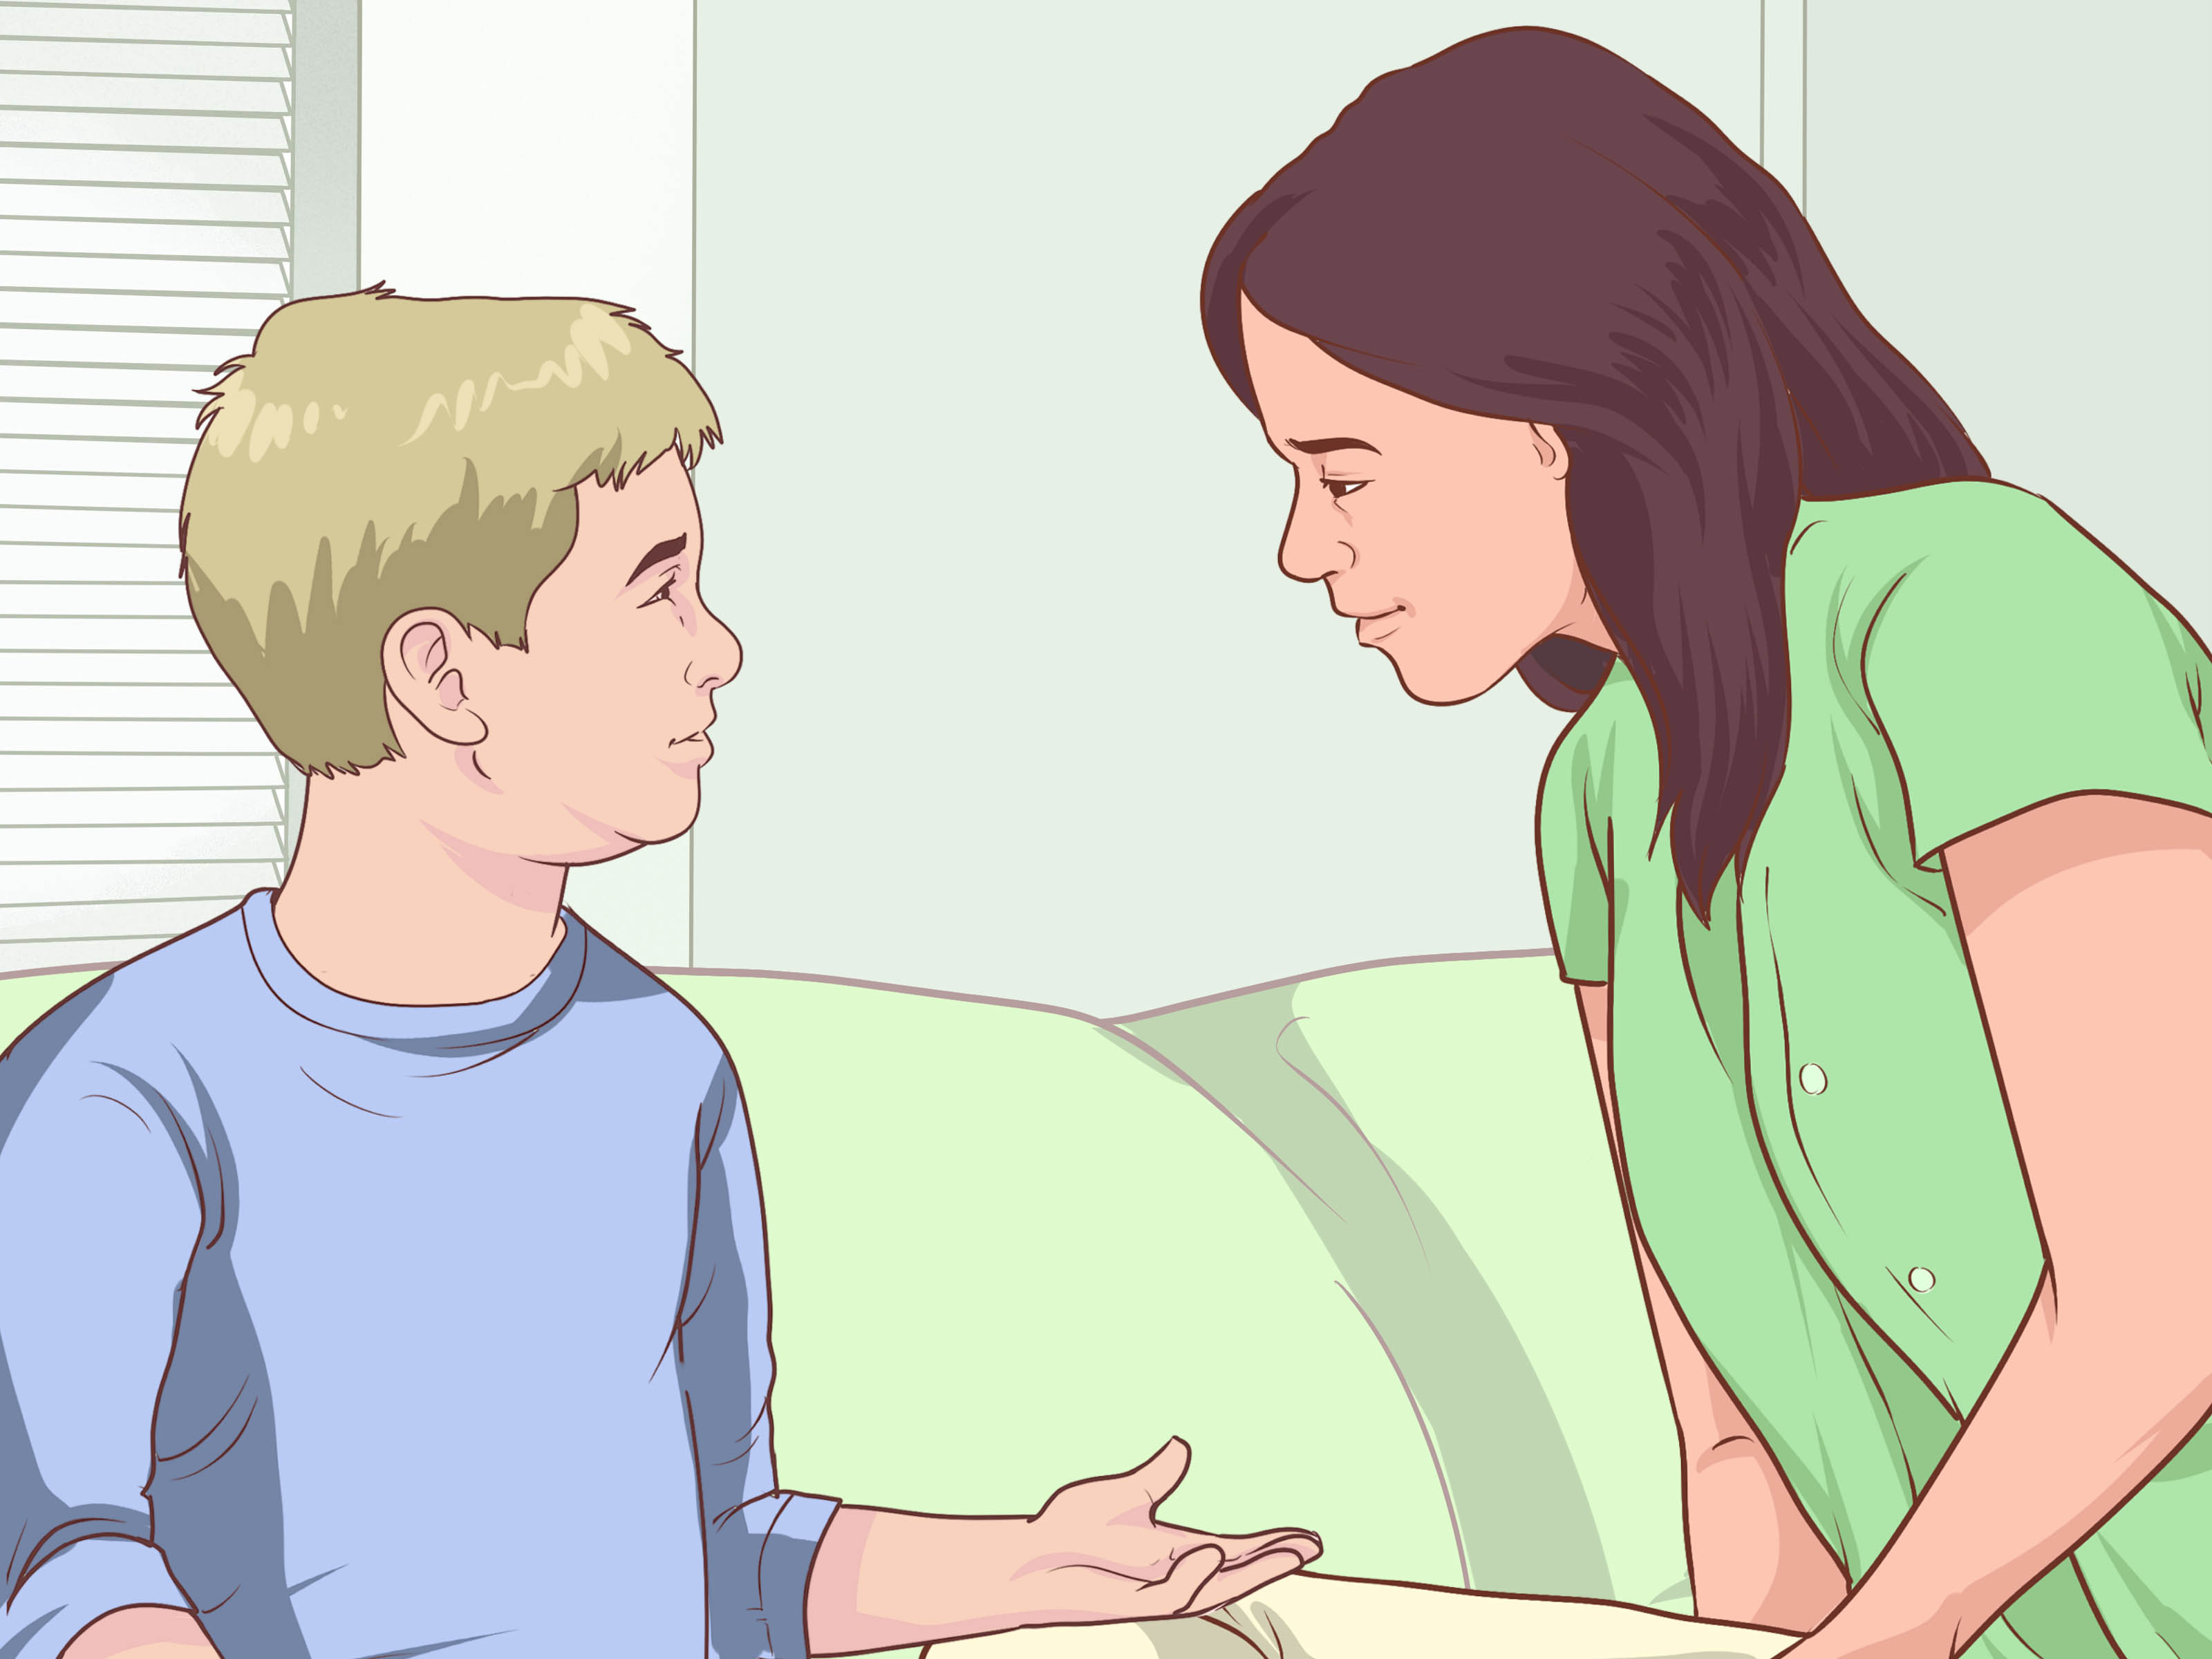 3 Ways to Get Your Mom to Buy You the Toy You Want - wikiHow